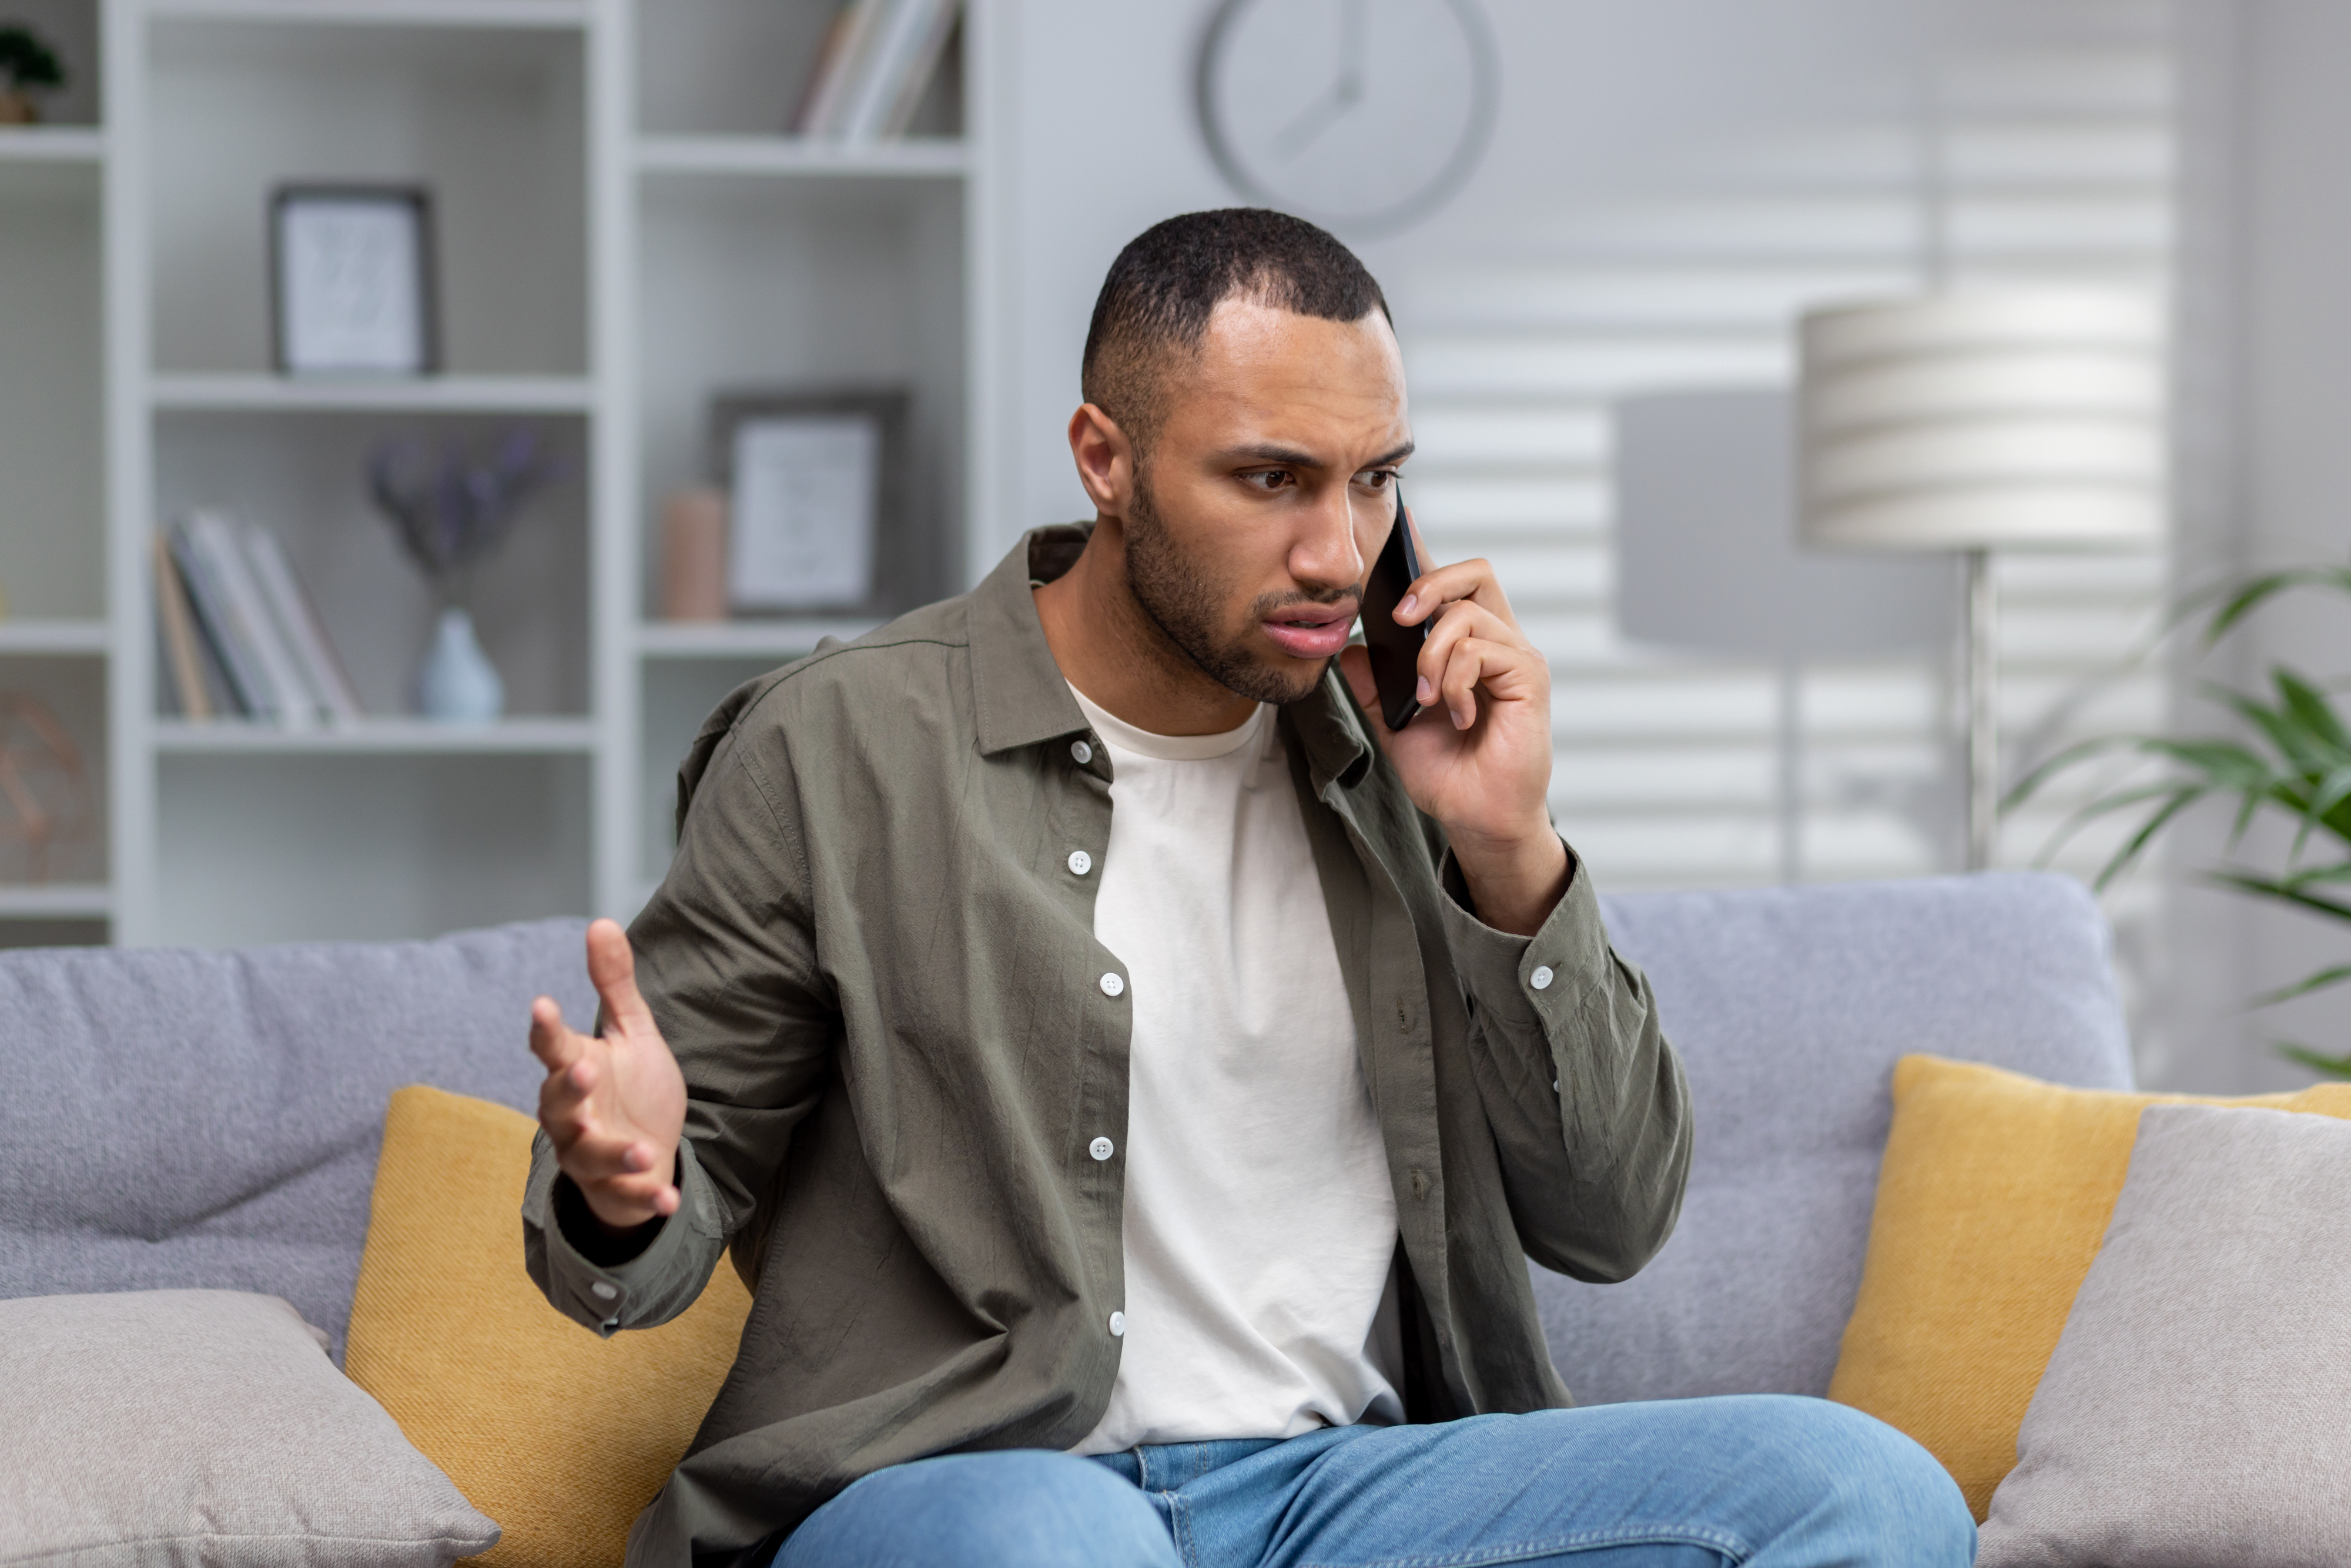 A man sitting on a couch and arguing with someone on the phone